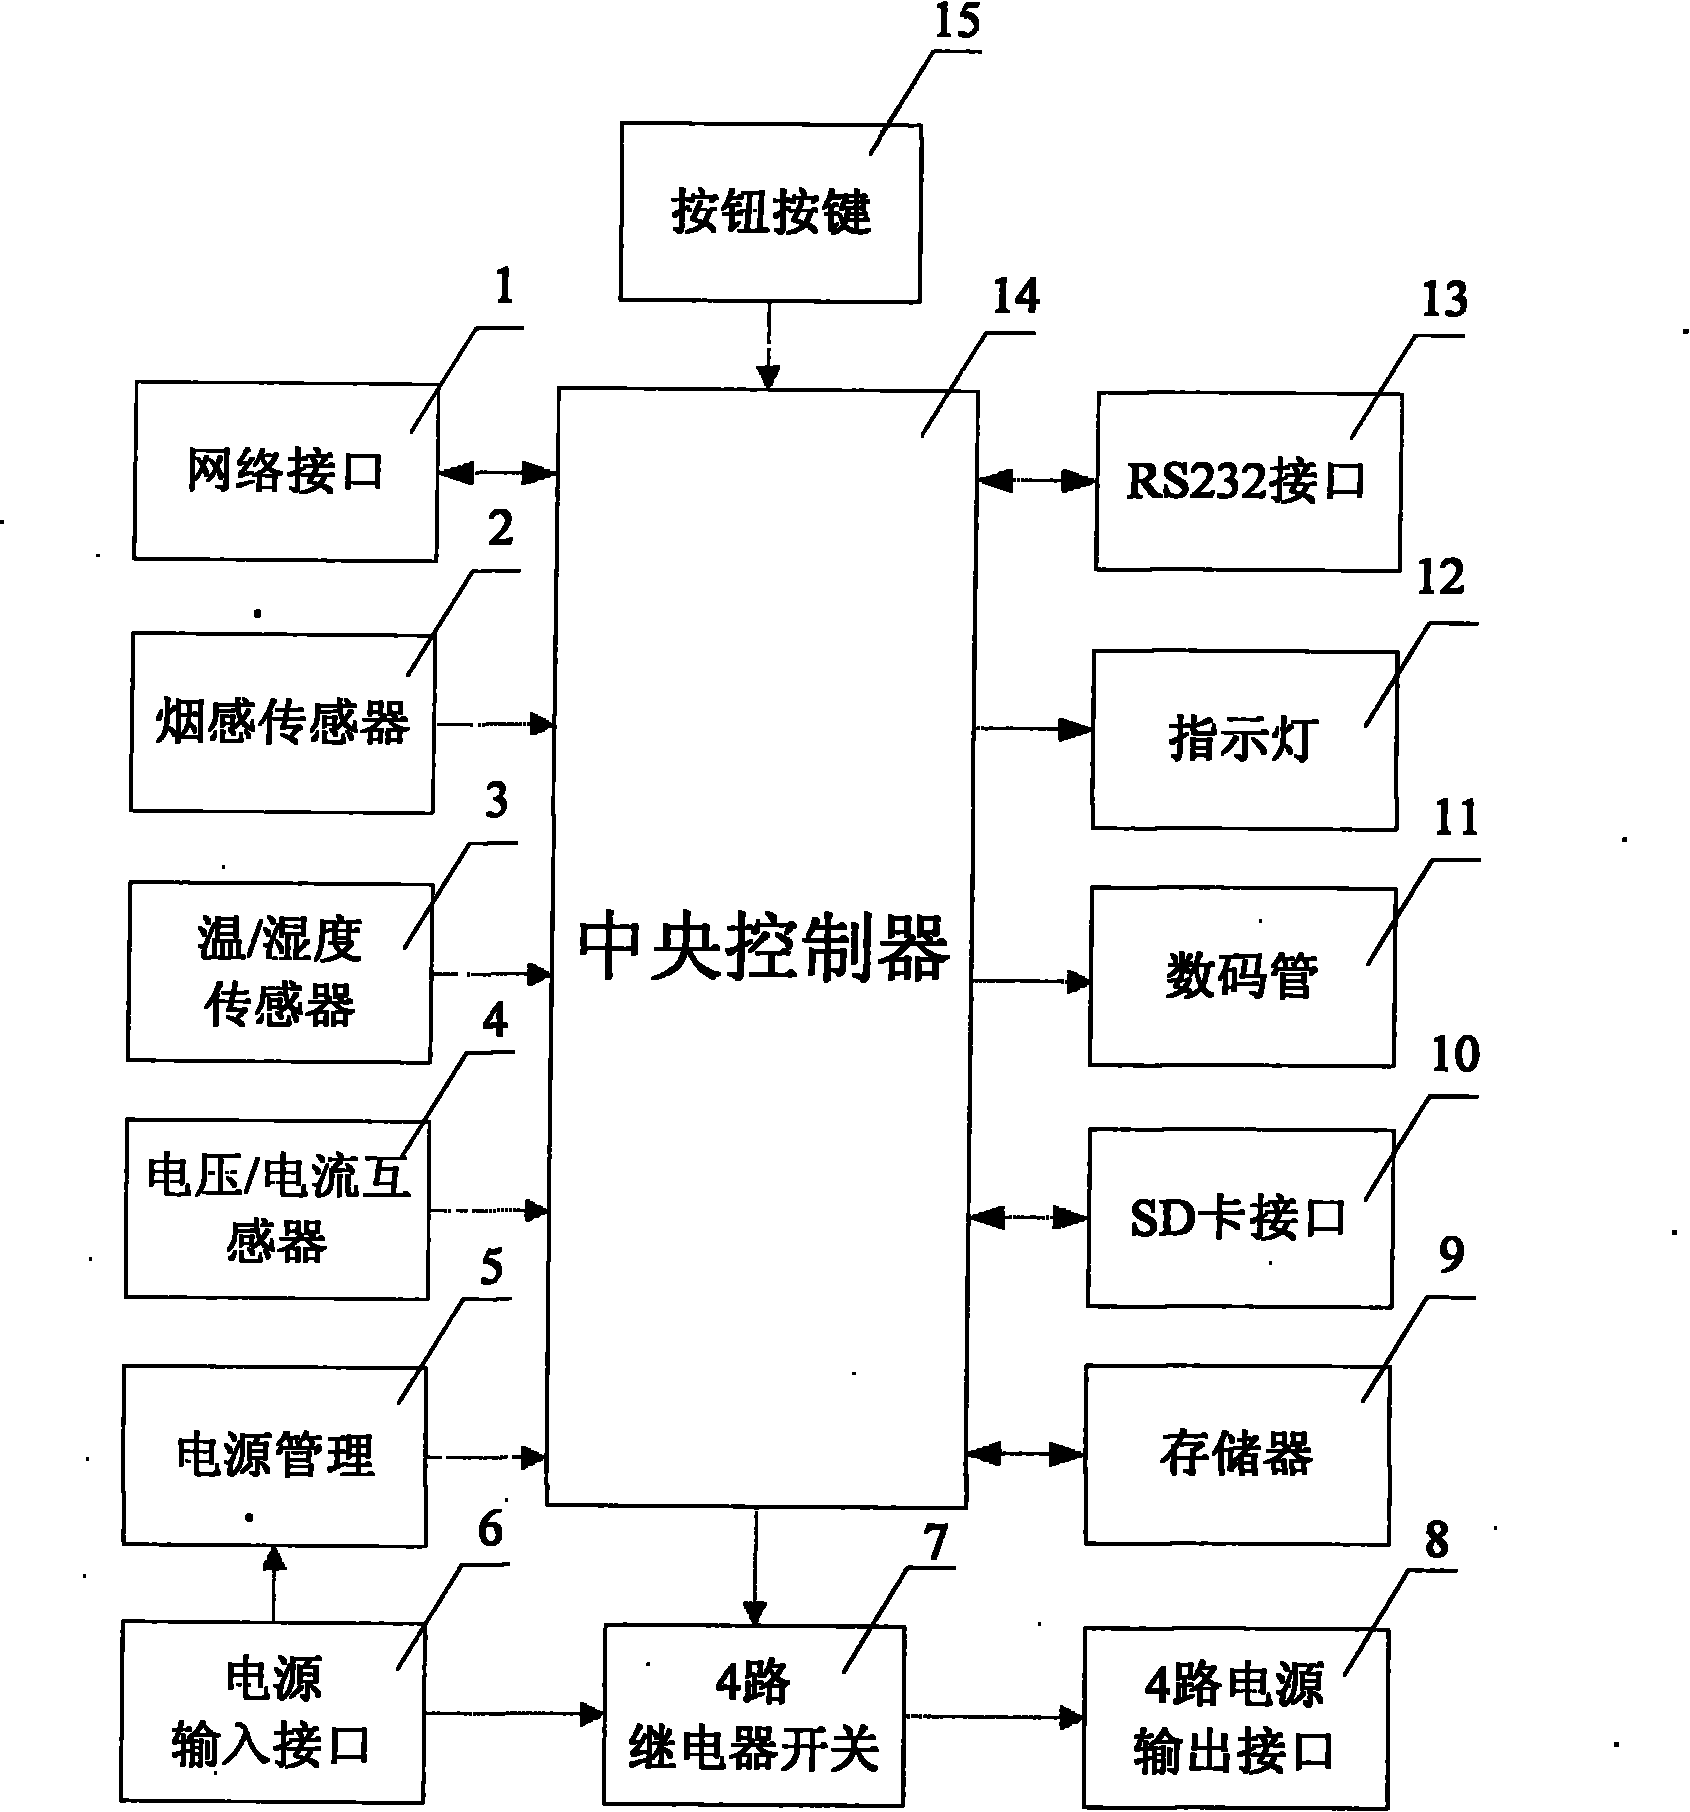 Remote power-supply control system and control method thereof